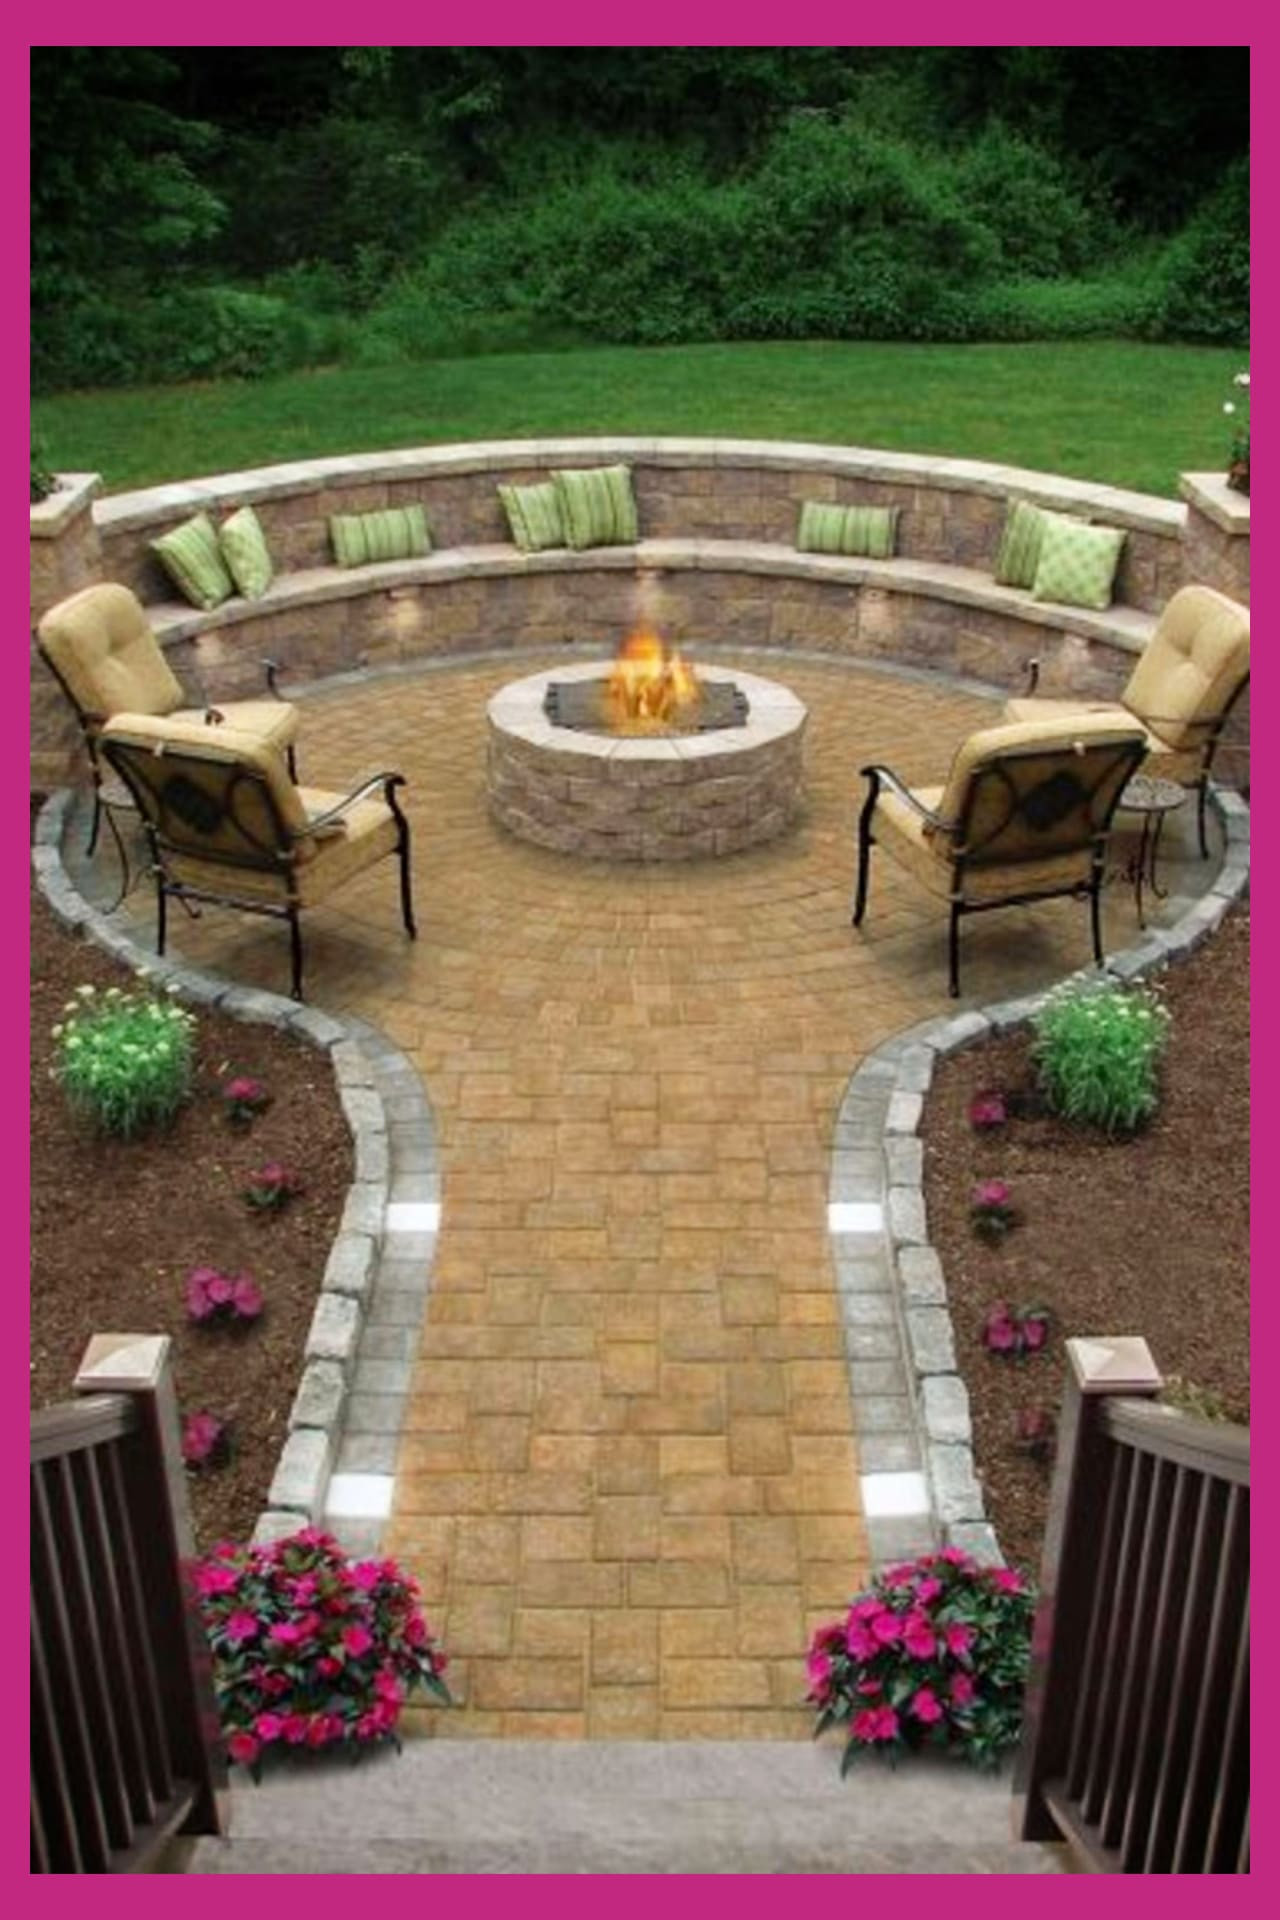 Backyard Fire Pit Plan
 Backyard Fire Pit Ideas and Designs for Your Yard Deck or